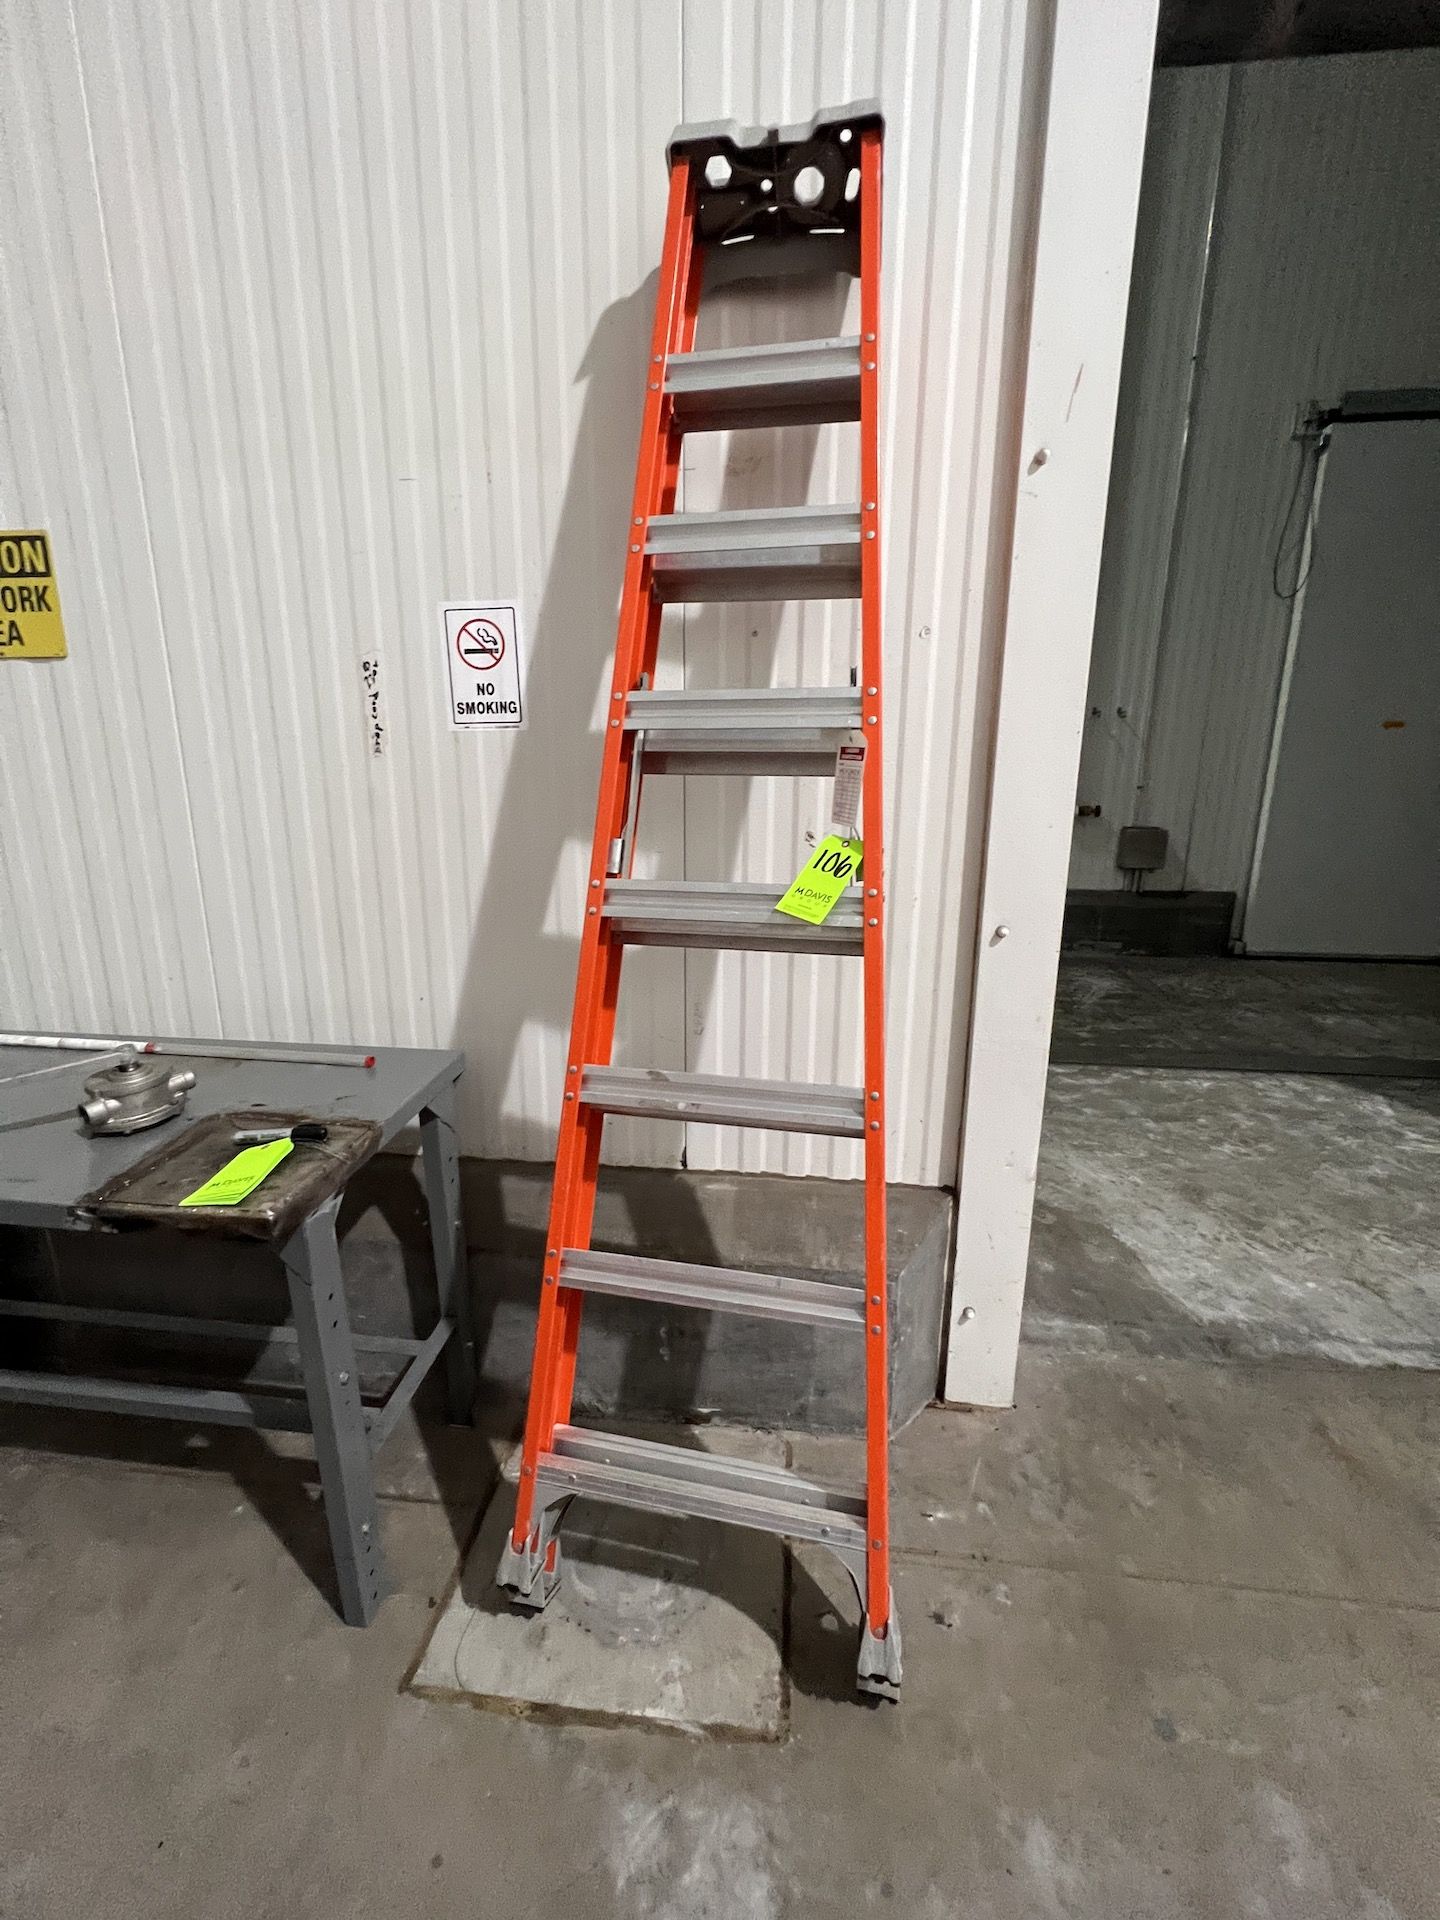 LOUISVILLE 12 FT 3 IN LADDER (RIGGING & SIMPLE LOADING FEE $20.00) (NOTE: DOES NOT INCLUDE SKIDDING